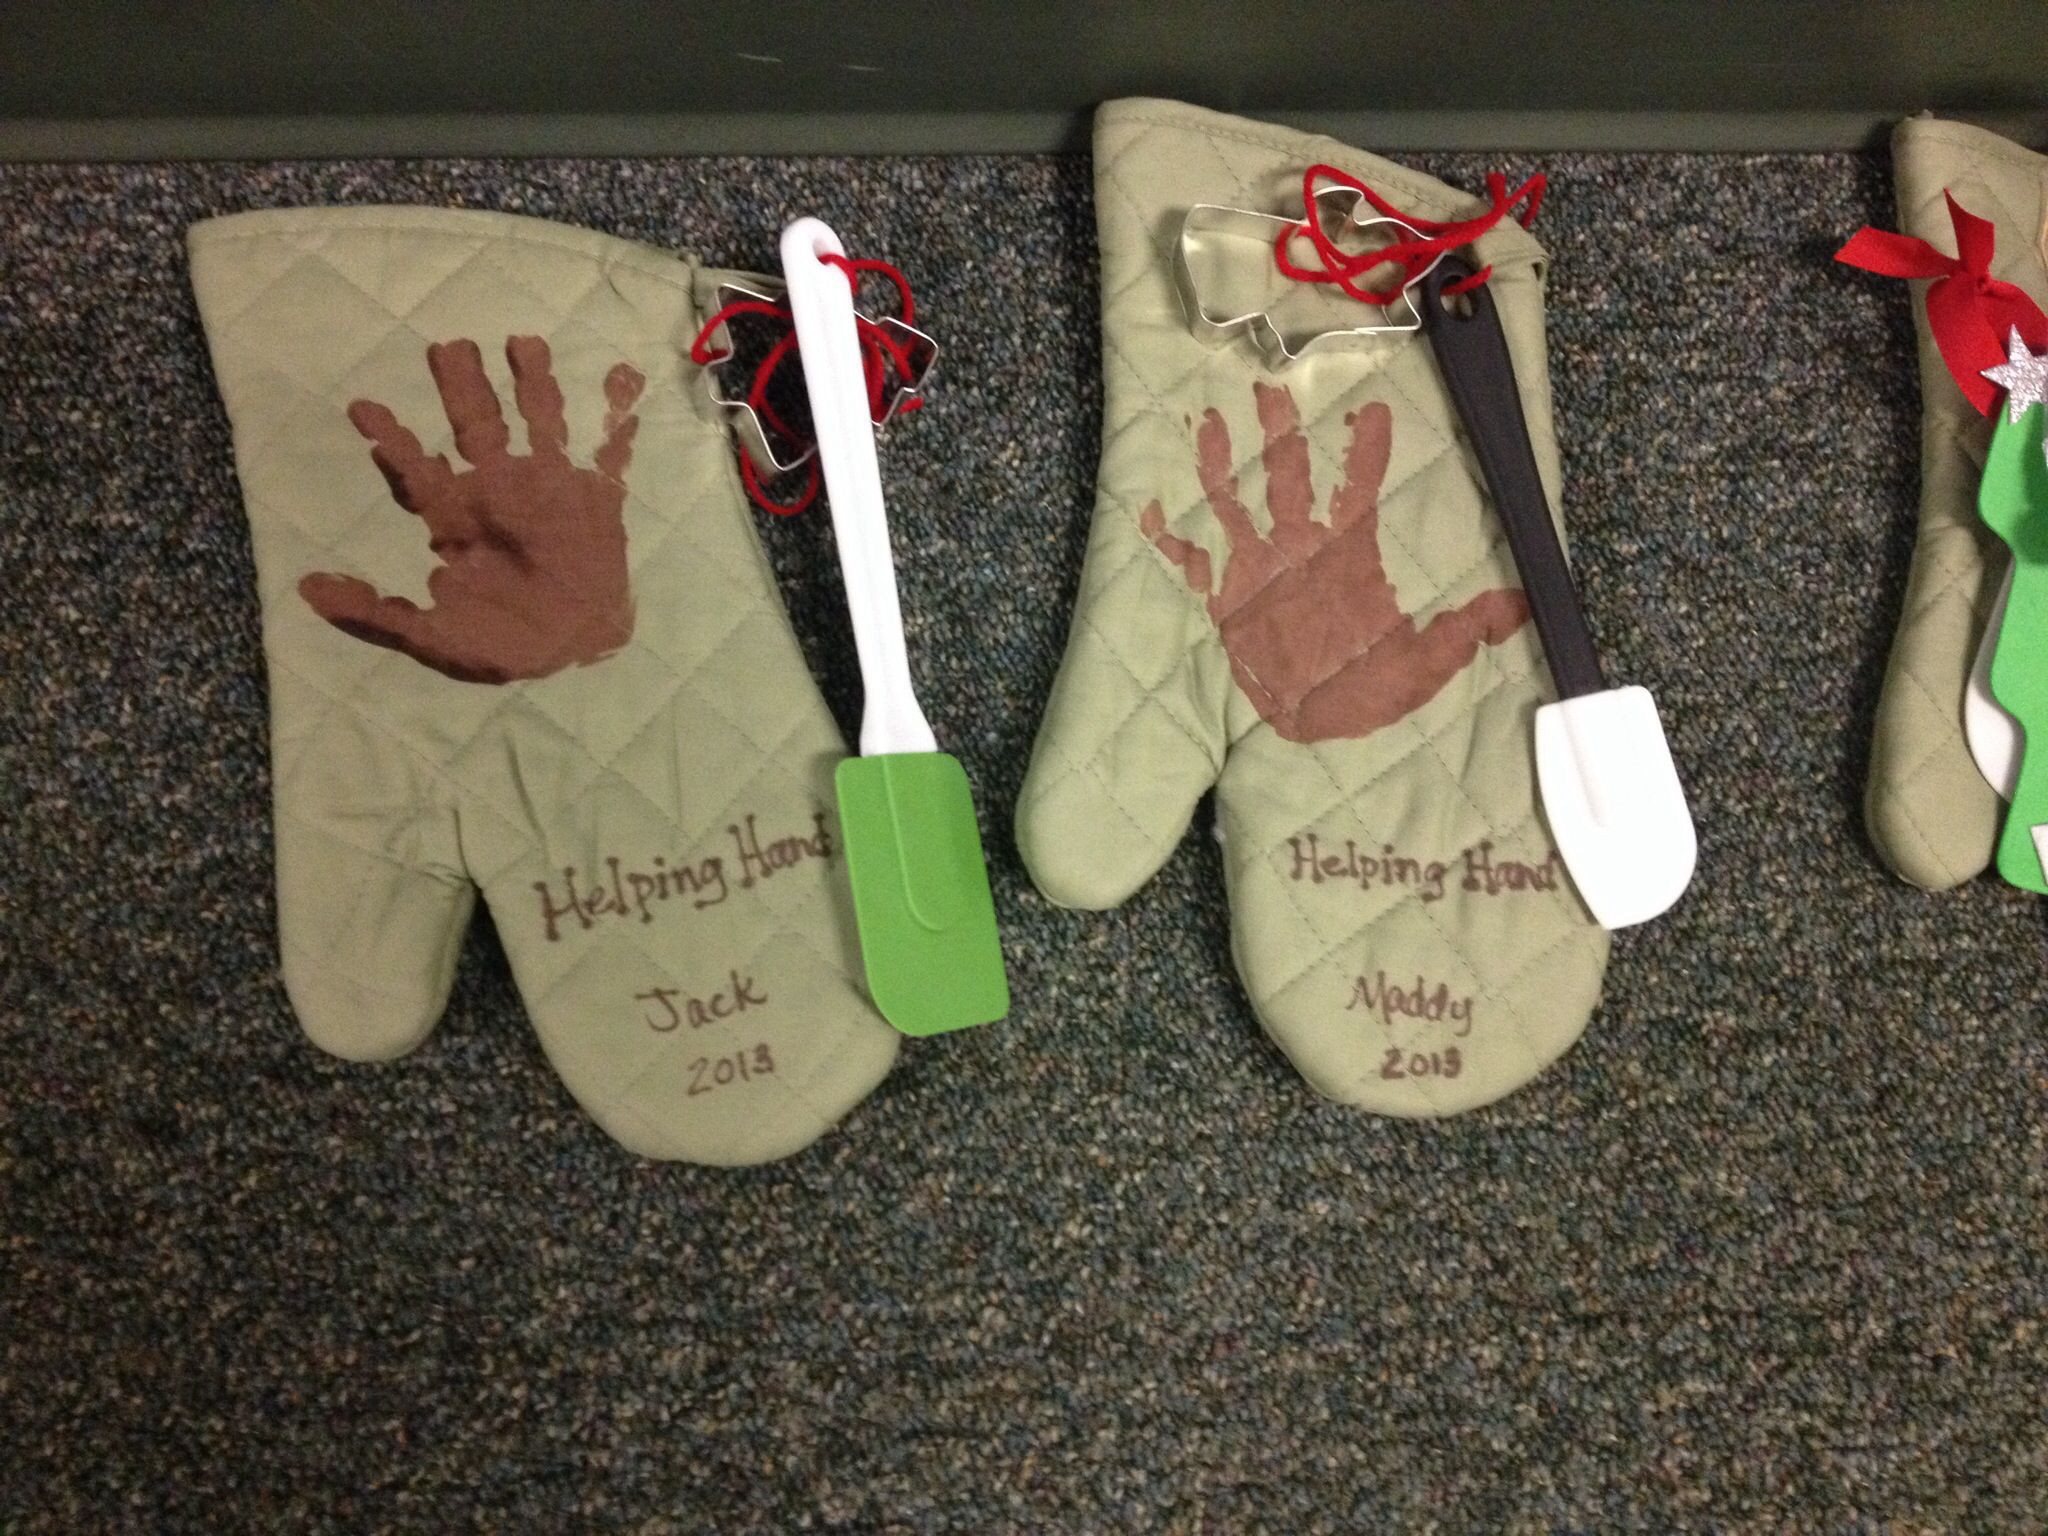 Parent Christmas Gift Ideas
 Helping Hand oven mitts as Christmas ts for parents